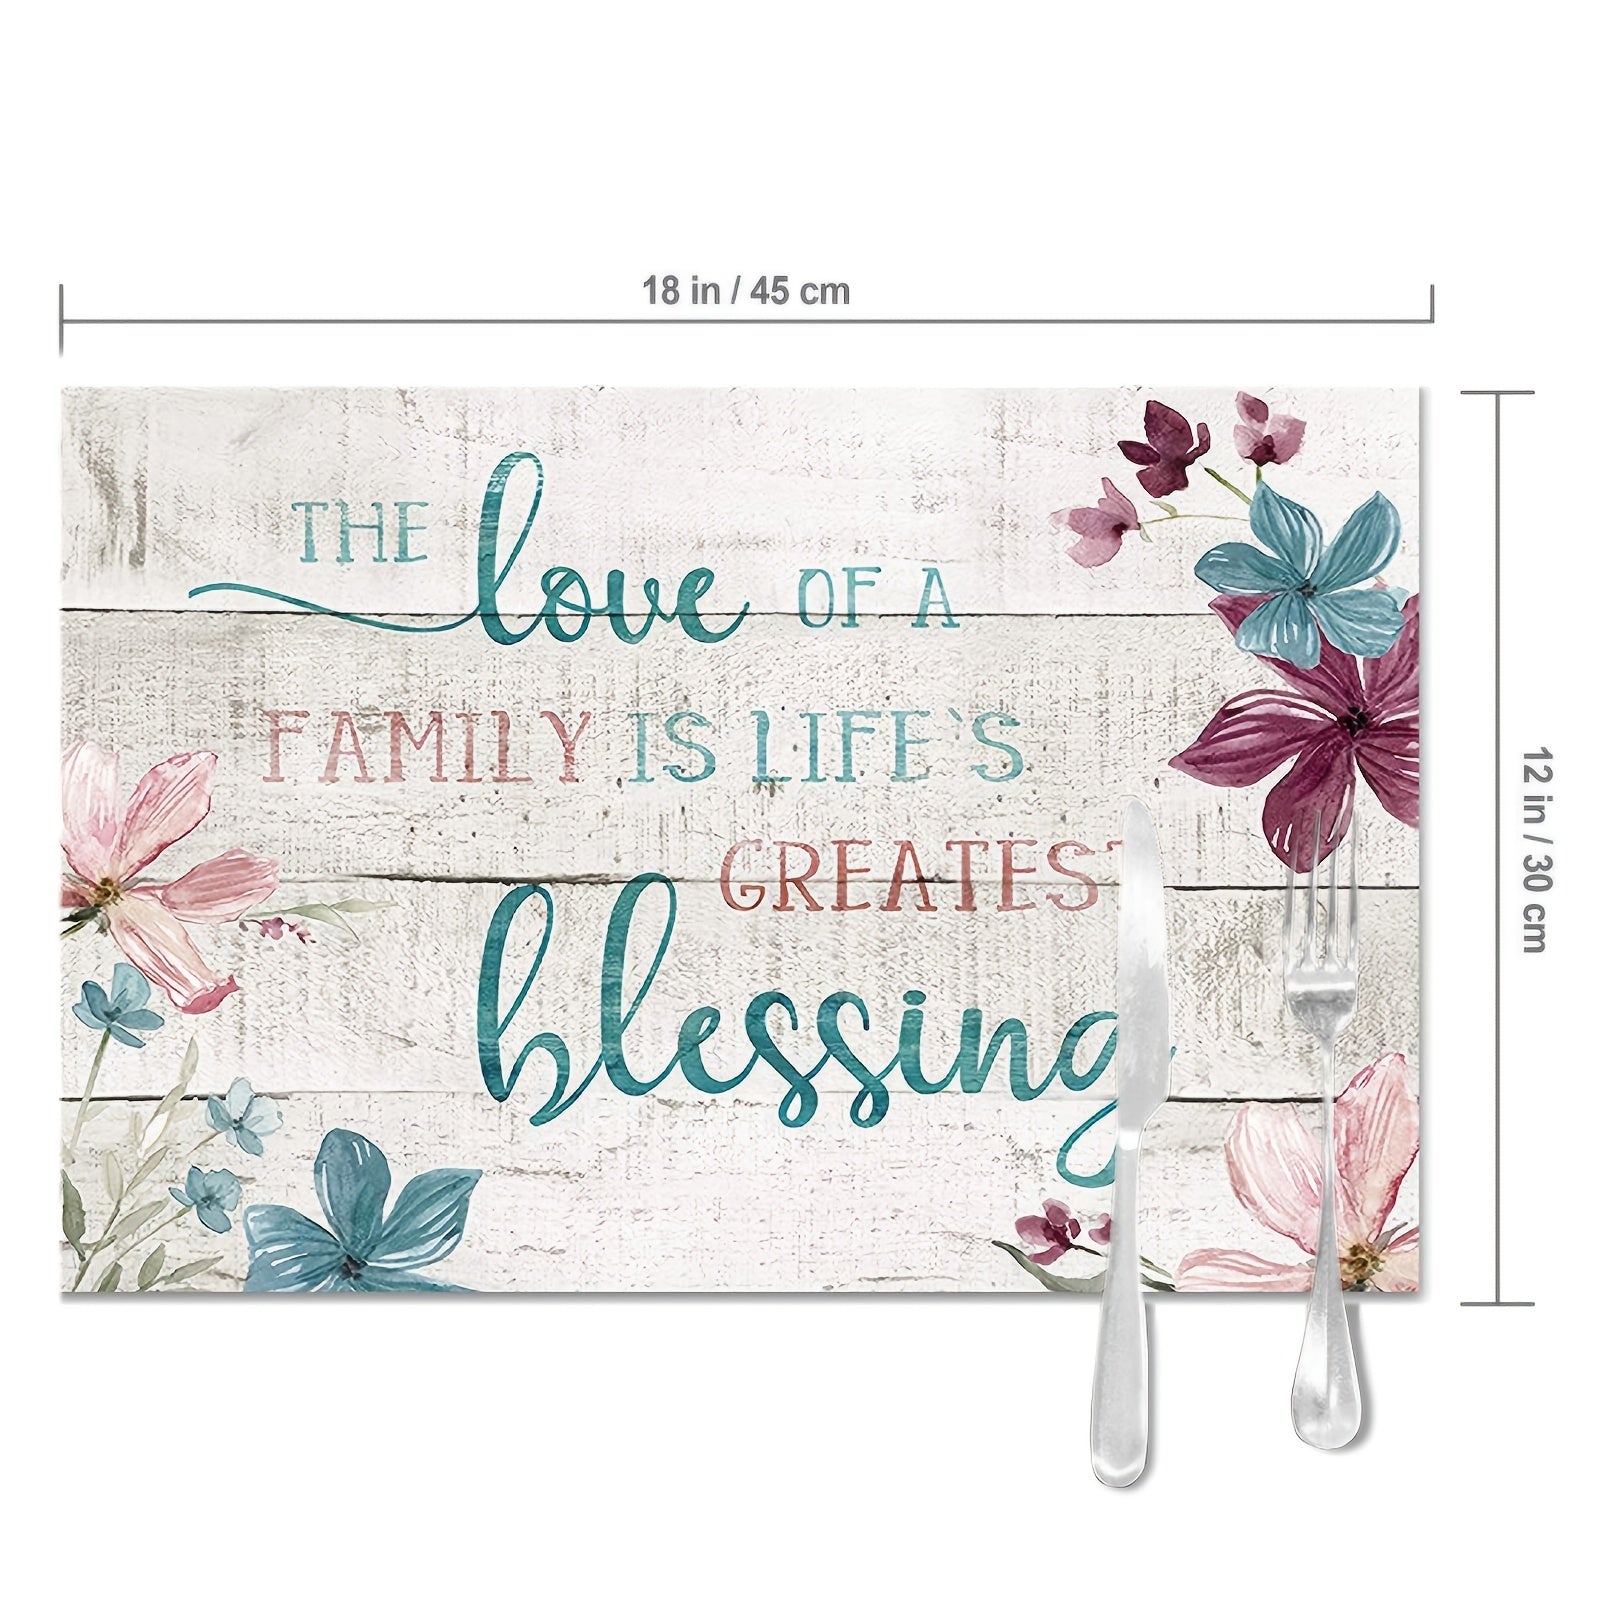 The Love Of A Family Christian Table Placemat 12*18in claimedbygoddesigns